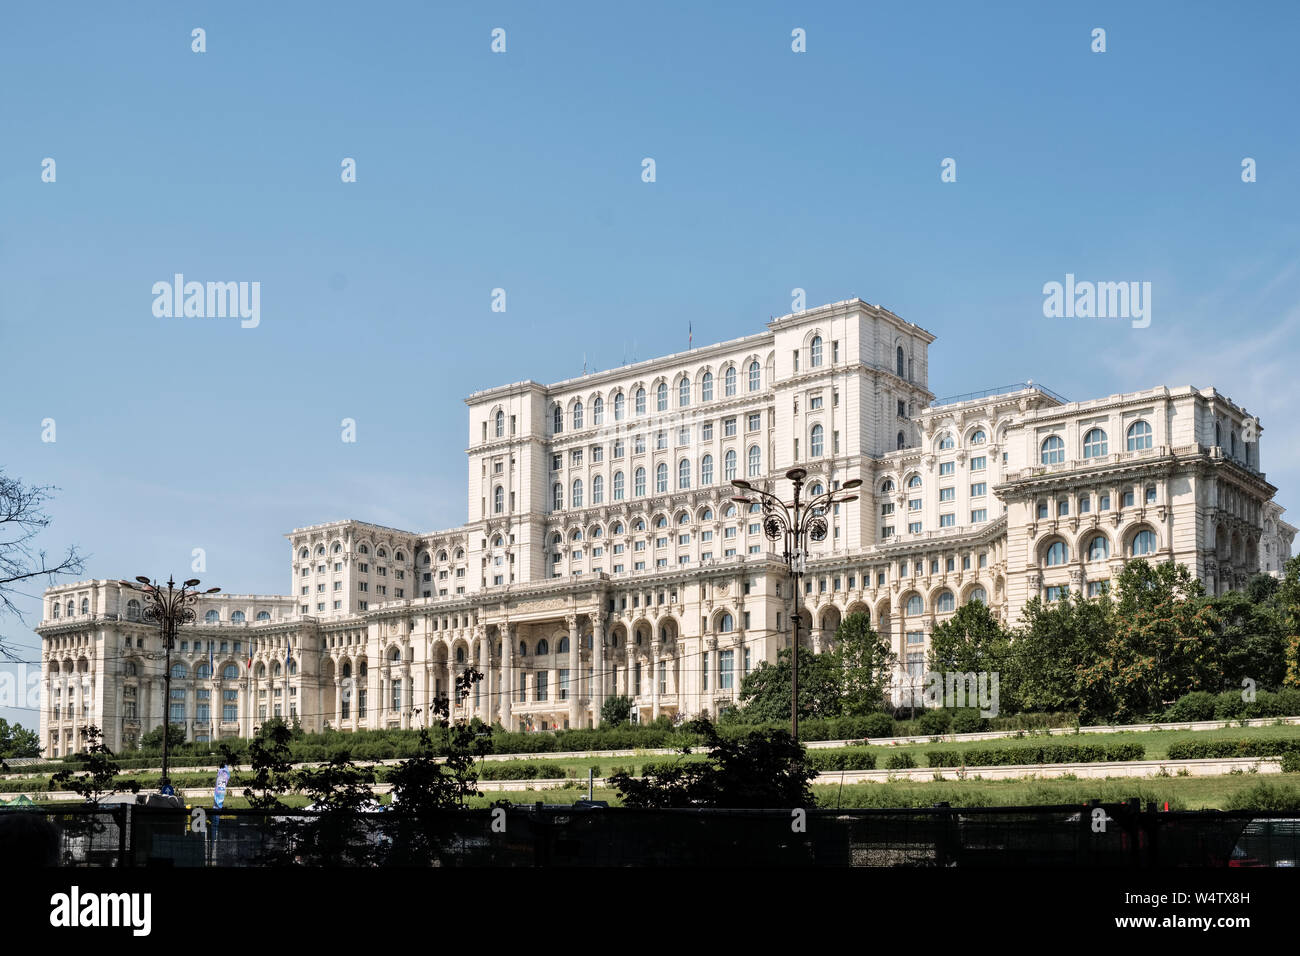 The Palace of the Parliament, Bucharest, Romania, the world's 2nd largest building, designed in 1984 for the Communist dictator Nicolae Ceaușescu Stock Photo